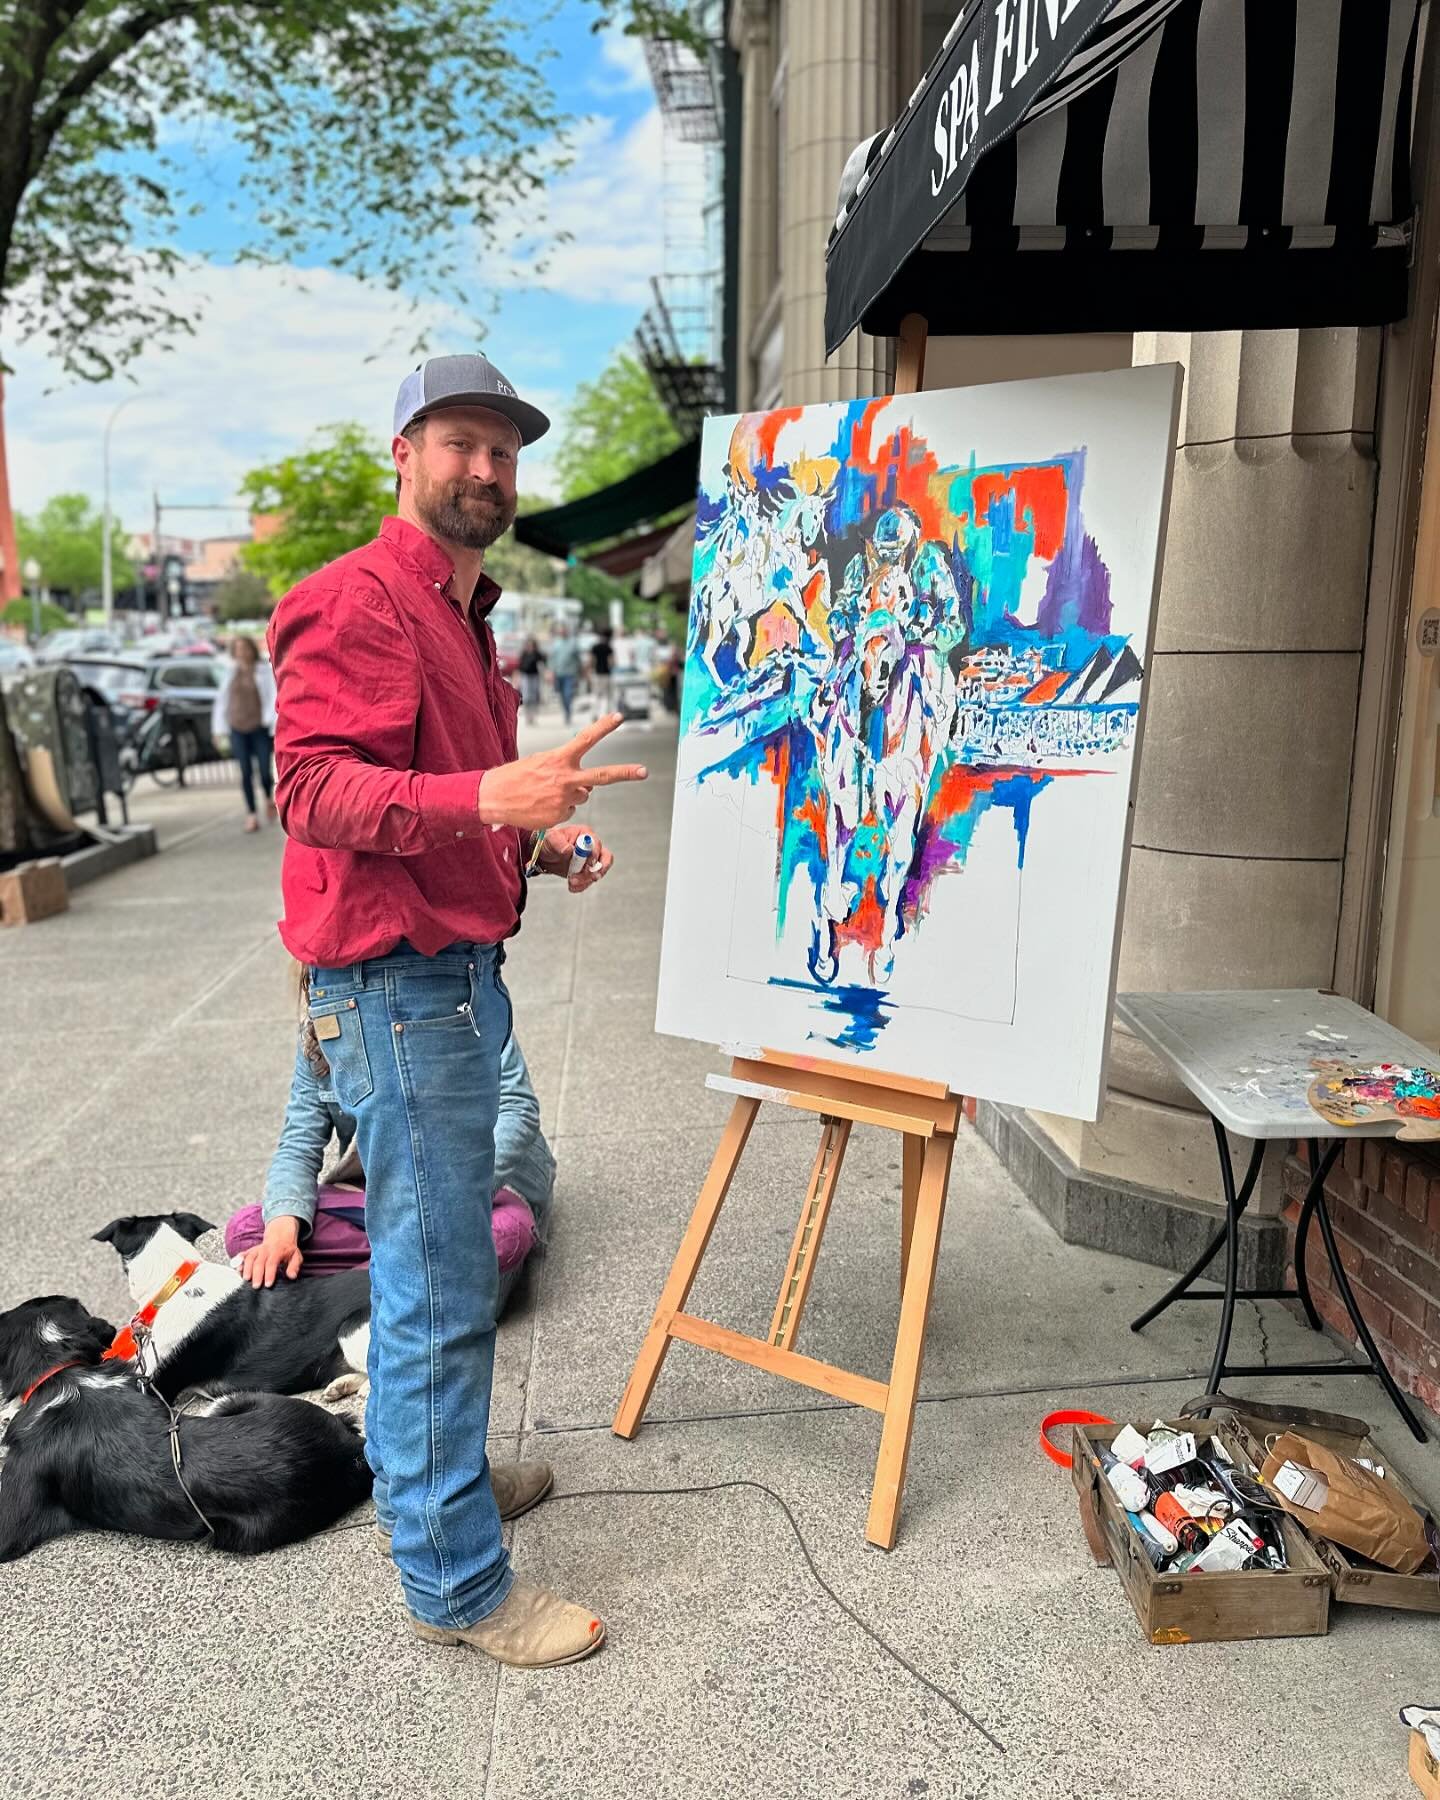 Stop by the gallery throughout the weekend to visit with returning artist, Bradley Chance Hays! 

Celebrate Preakness weekend with a little live painting! 

#equineart #saratogafineart #saratogasprings #bradleychancehays #oilpainting #livepainting #s